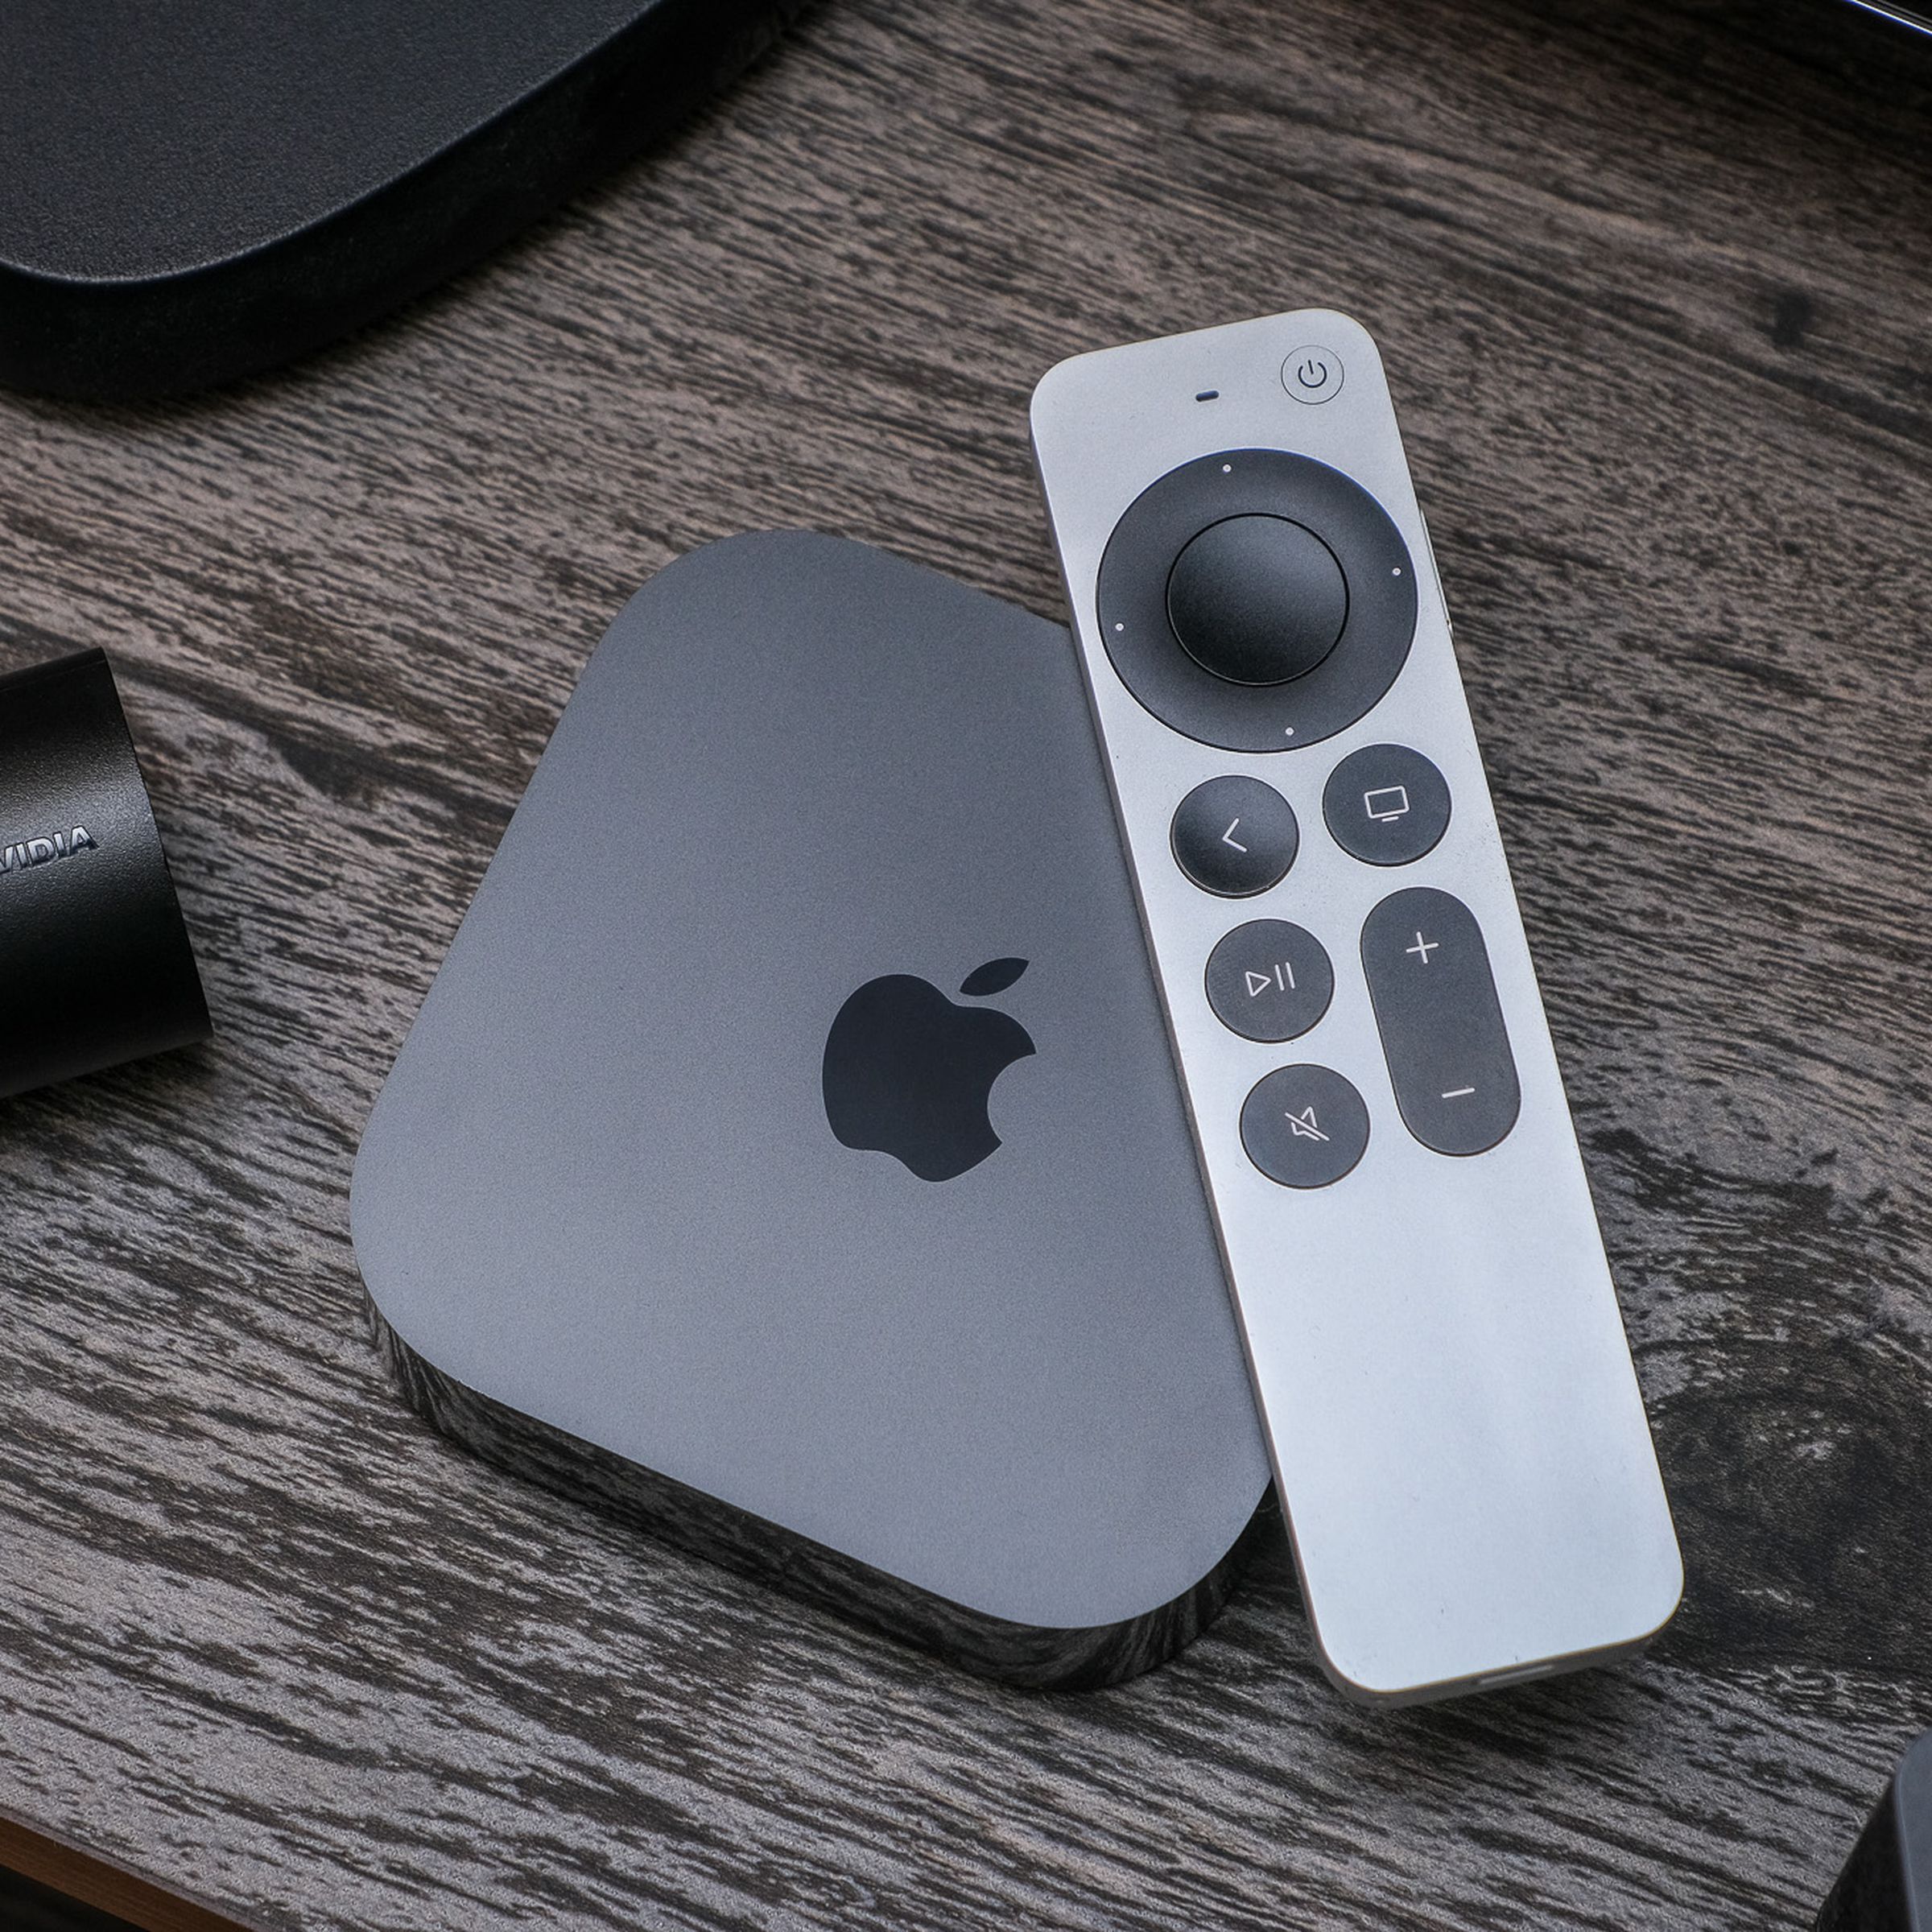 A photo of the third-gen Apple TV 4K on a TV stand surrounded by competing products from Amazon, Roku, and Nvidia.